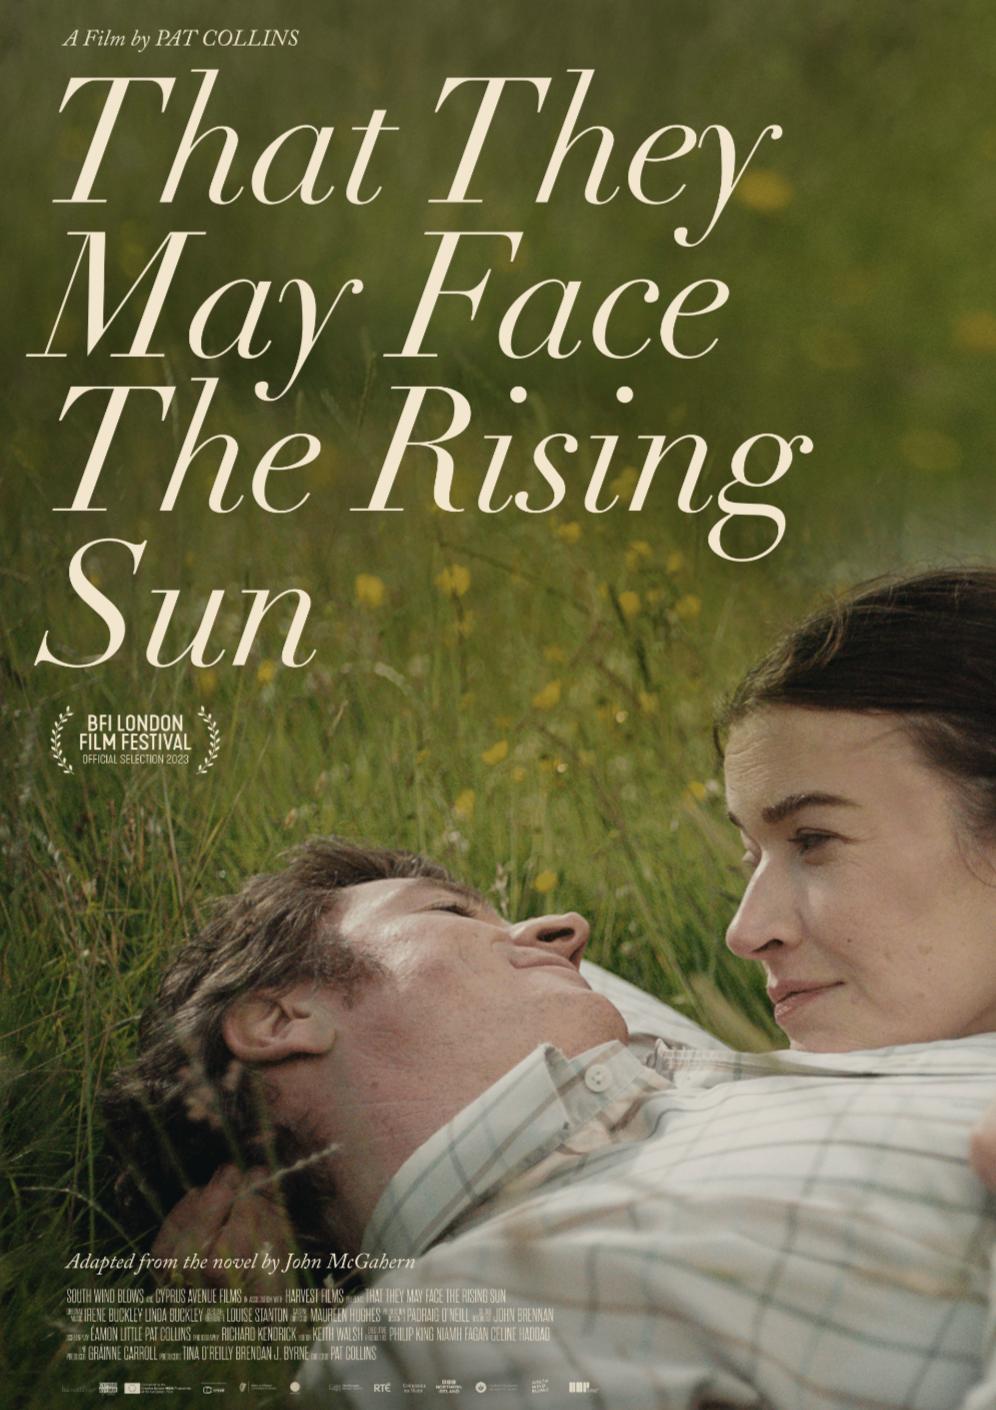 Parent & Baby: That They May Face The Rising Sun